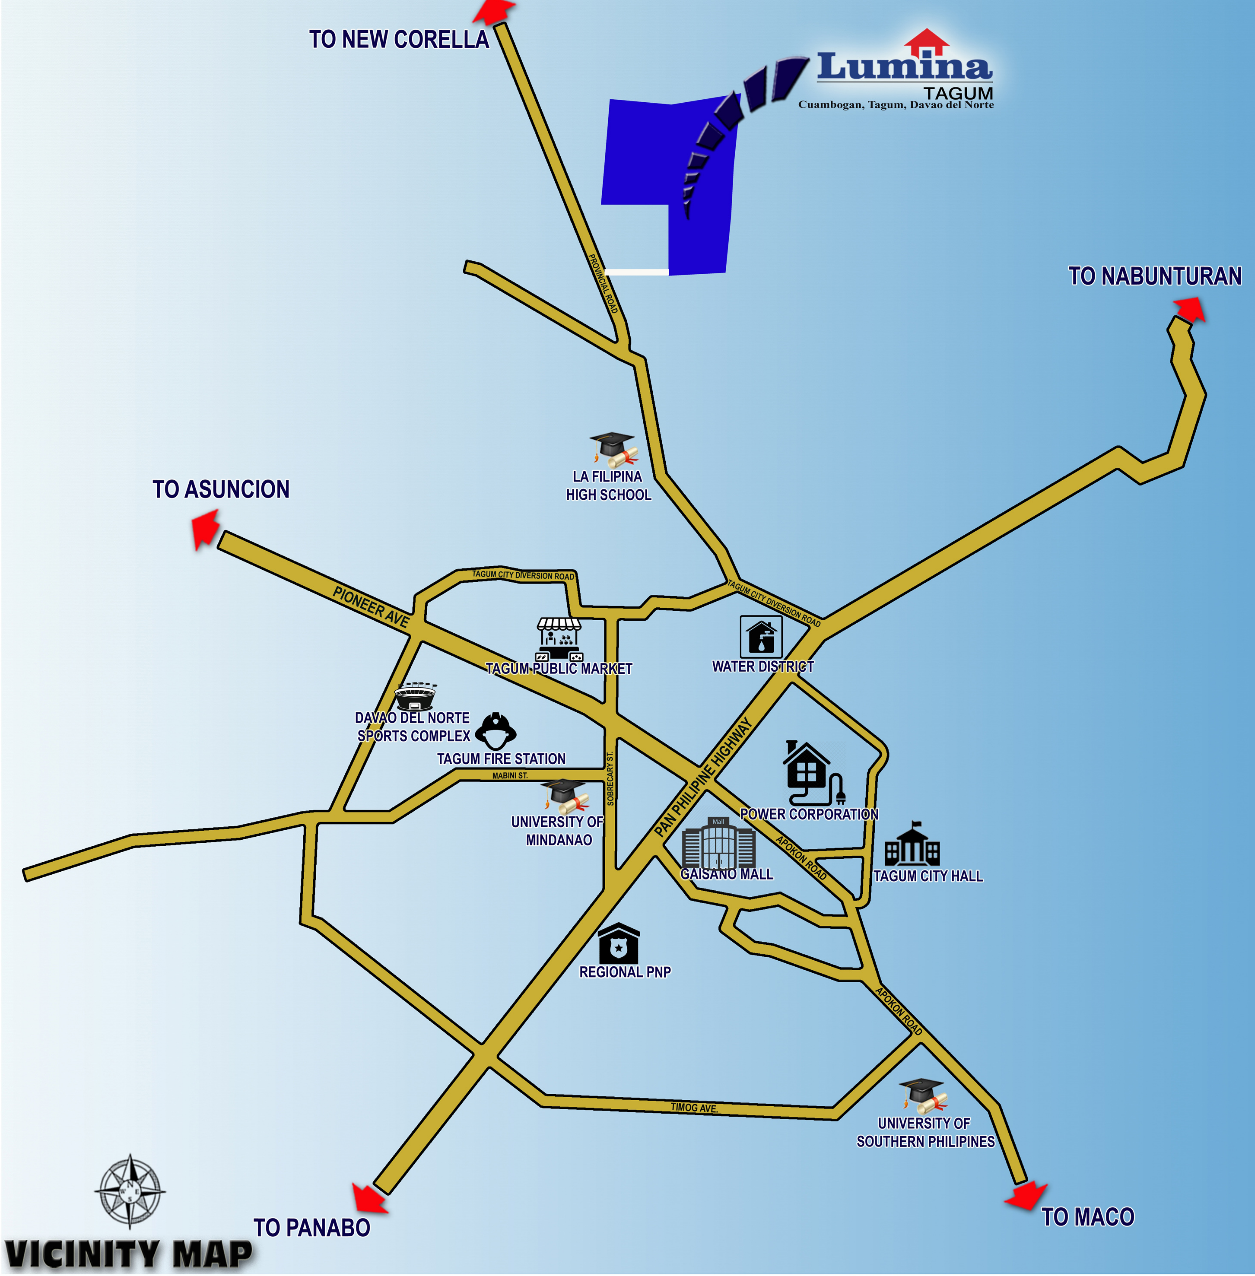 VICINITY-MAP-1635301677.png